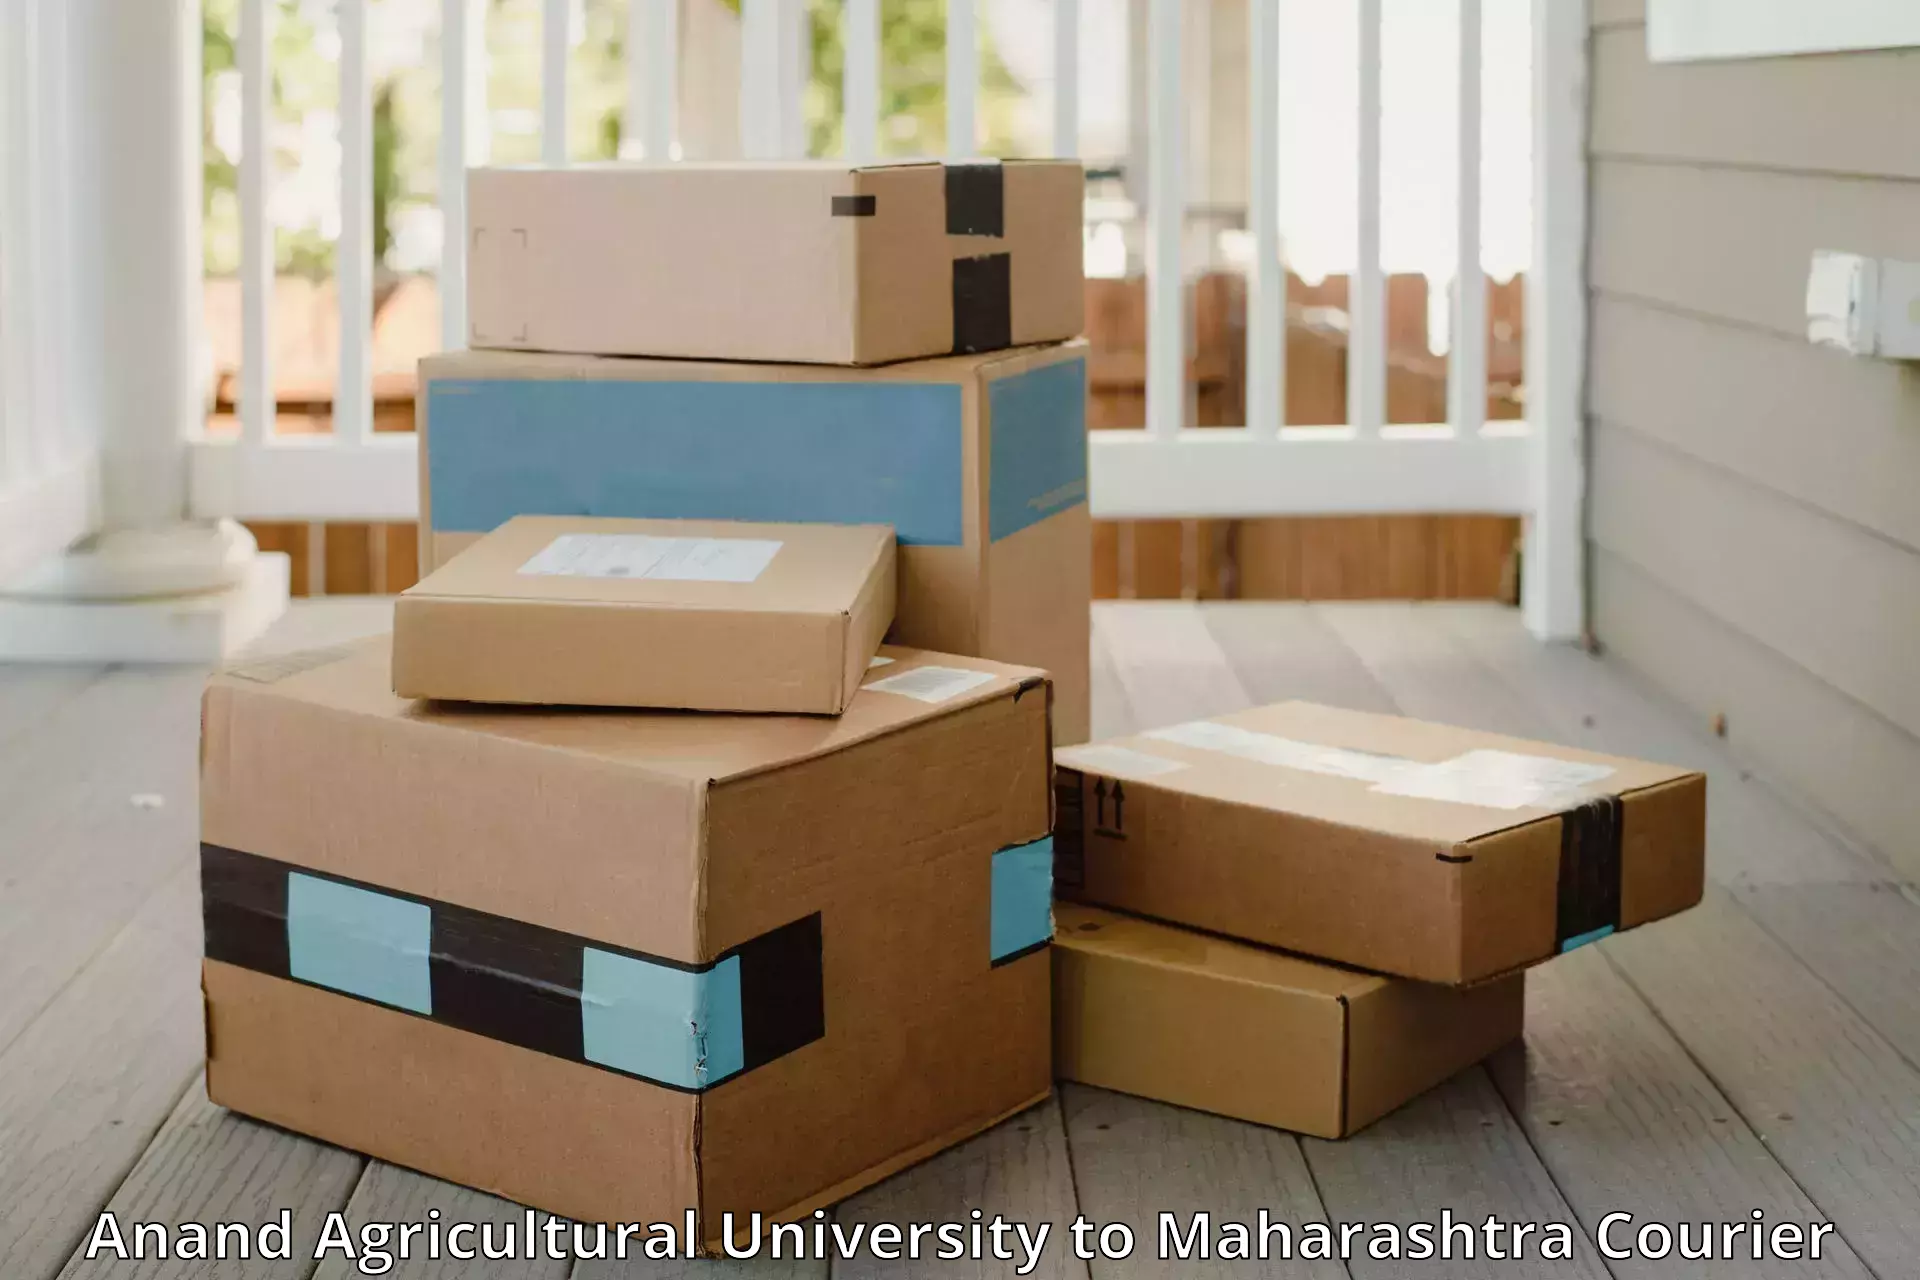 Luggage transport deals Anand Agricultural University to Tata Institute of Social Sciences Mumbai